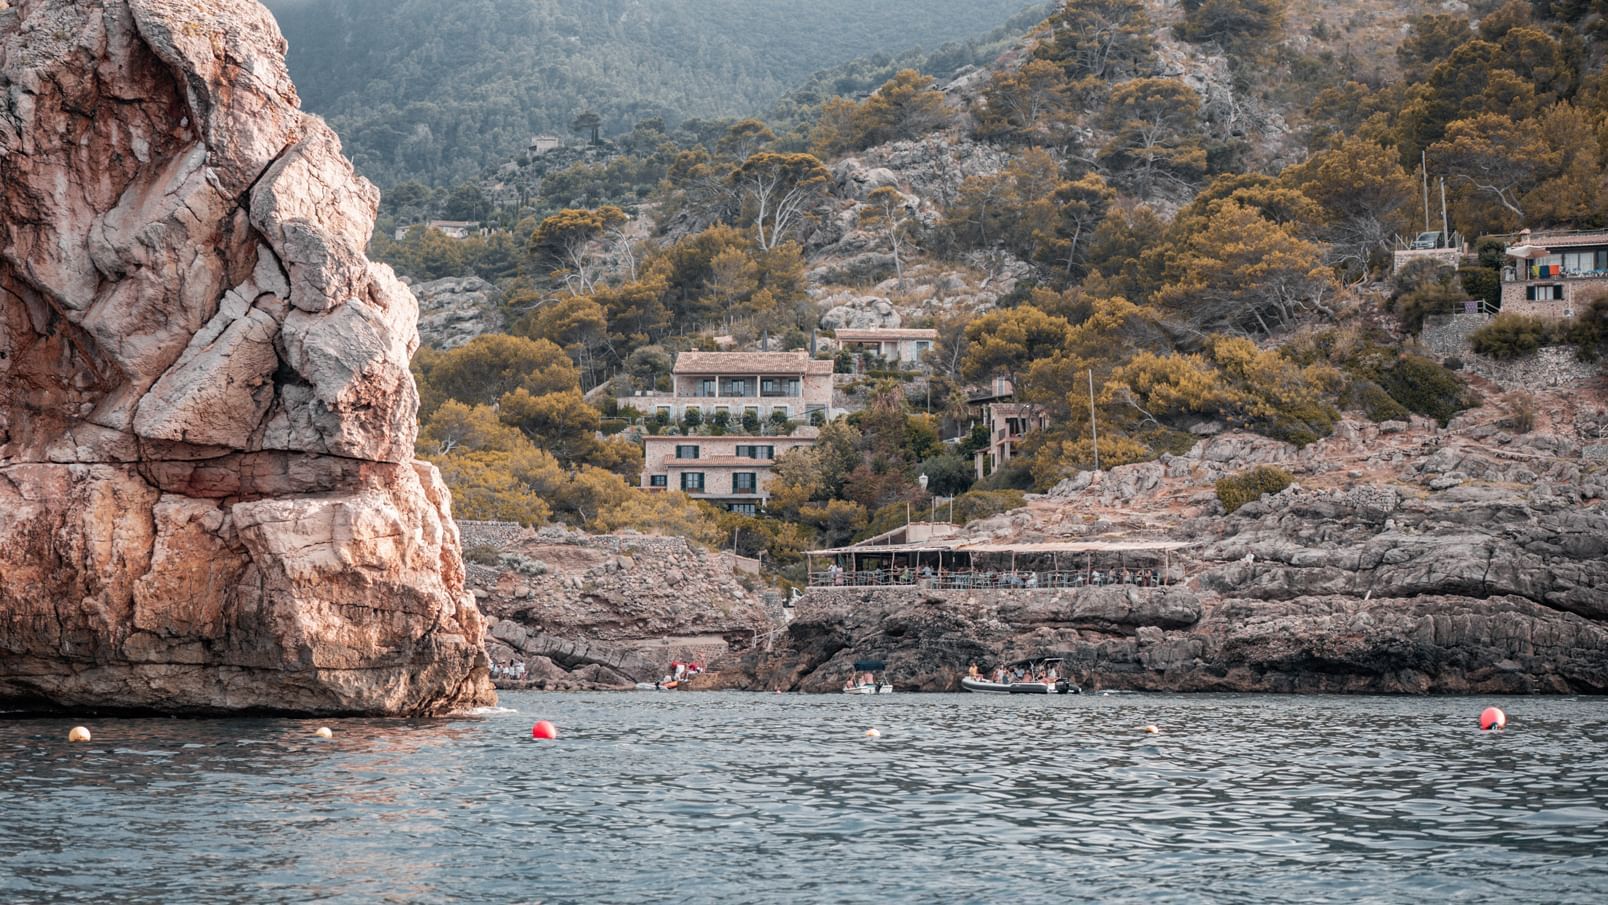 Top 10 Things to Do in Soller and Surrounding Area - The Other Mallorca